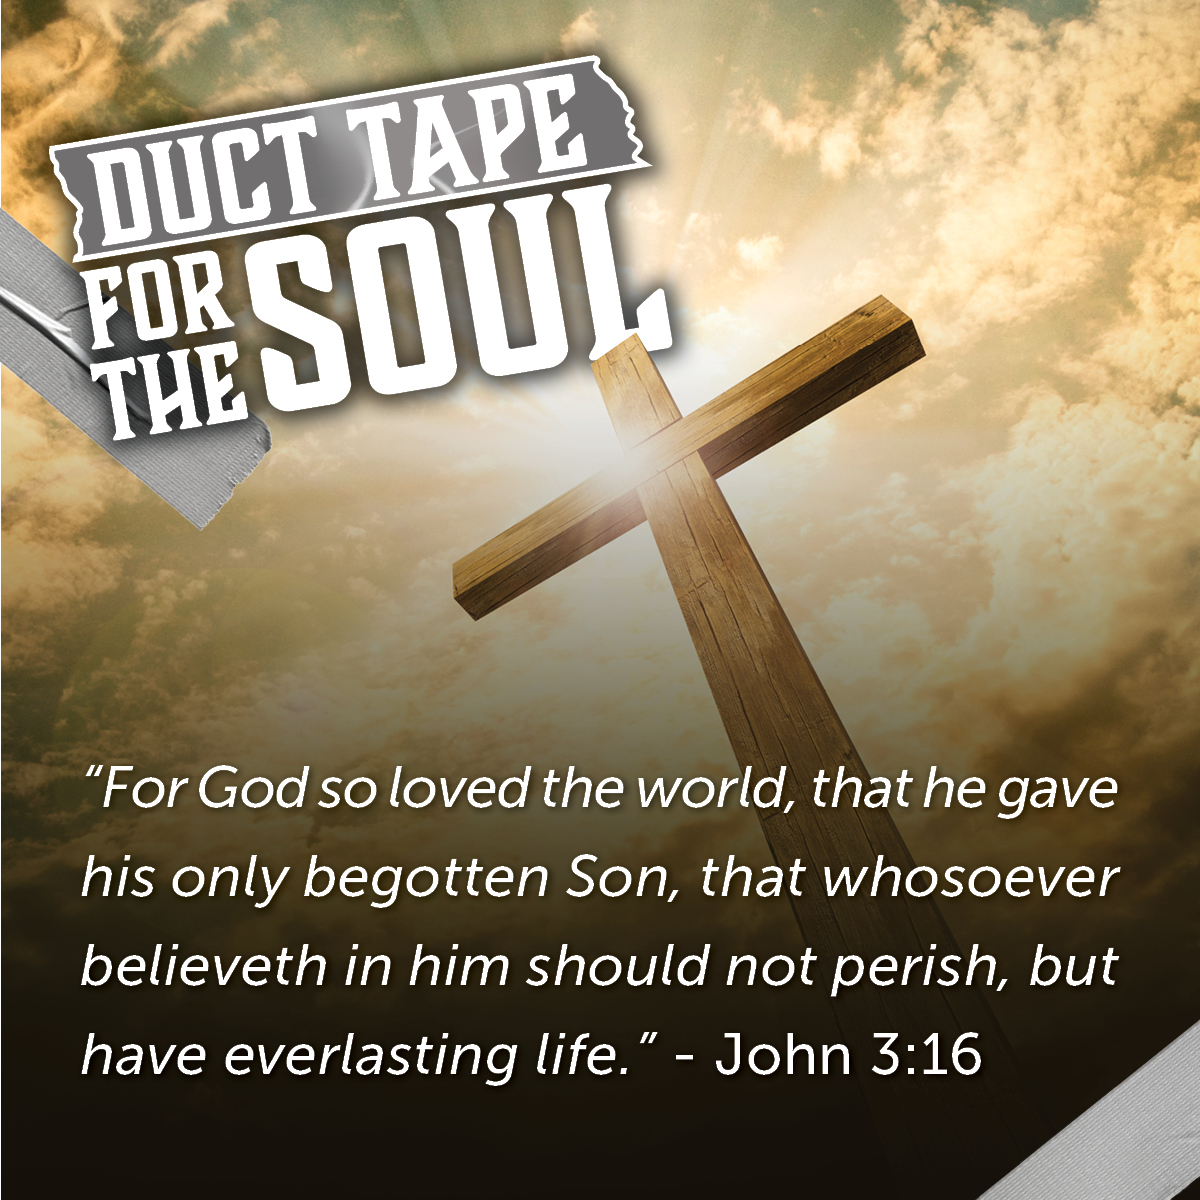 Every day is a gift from God - April Duct Tape for the Soul 